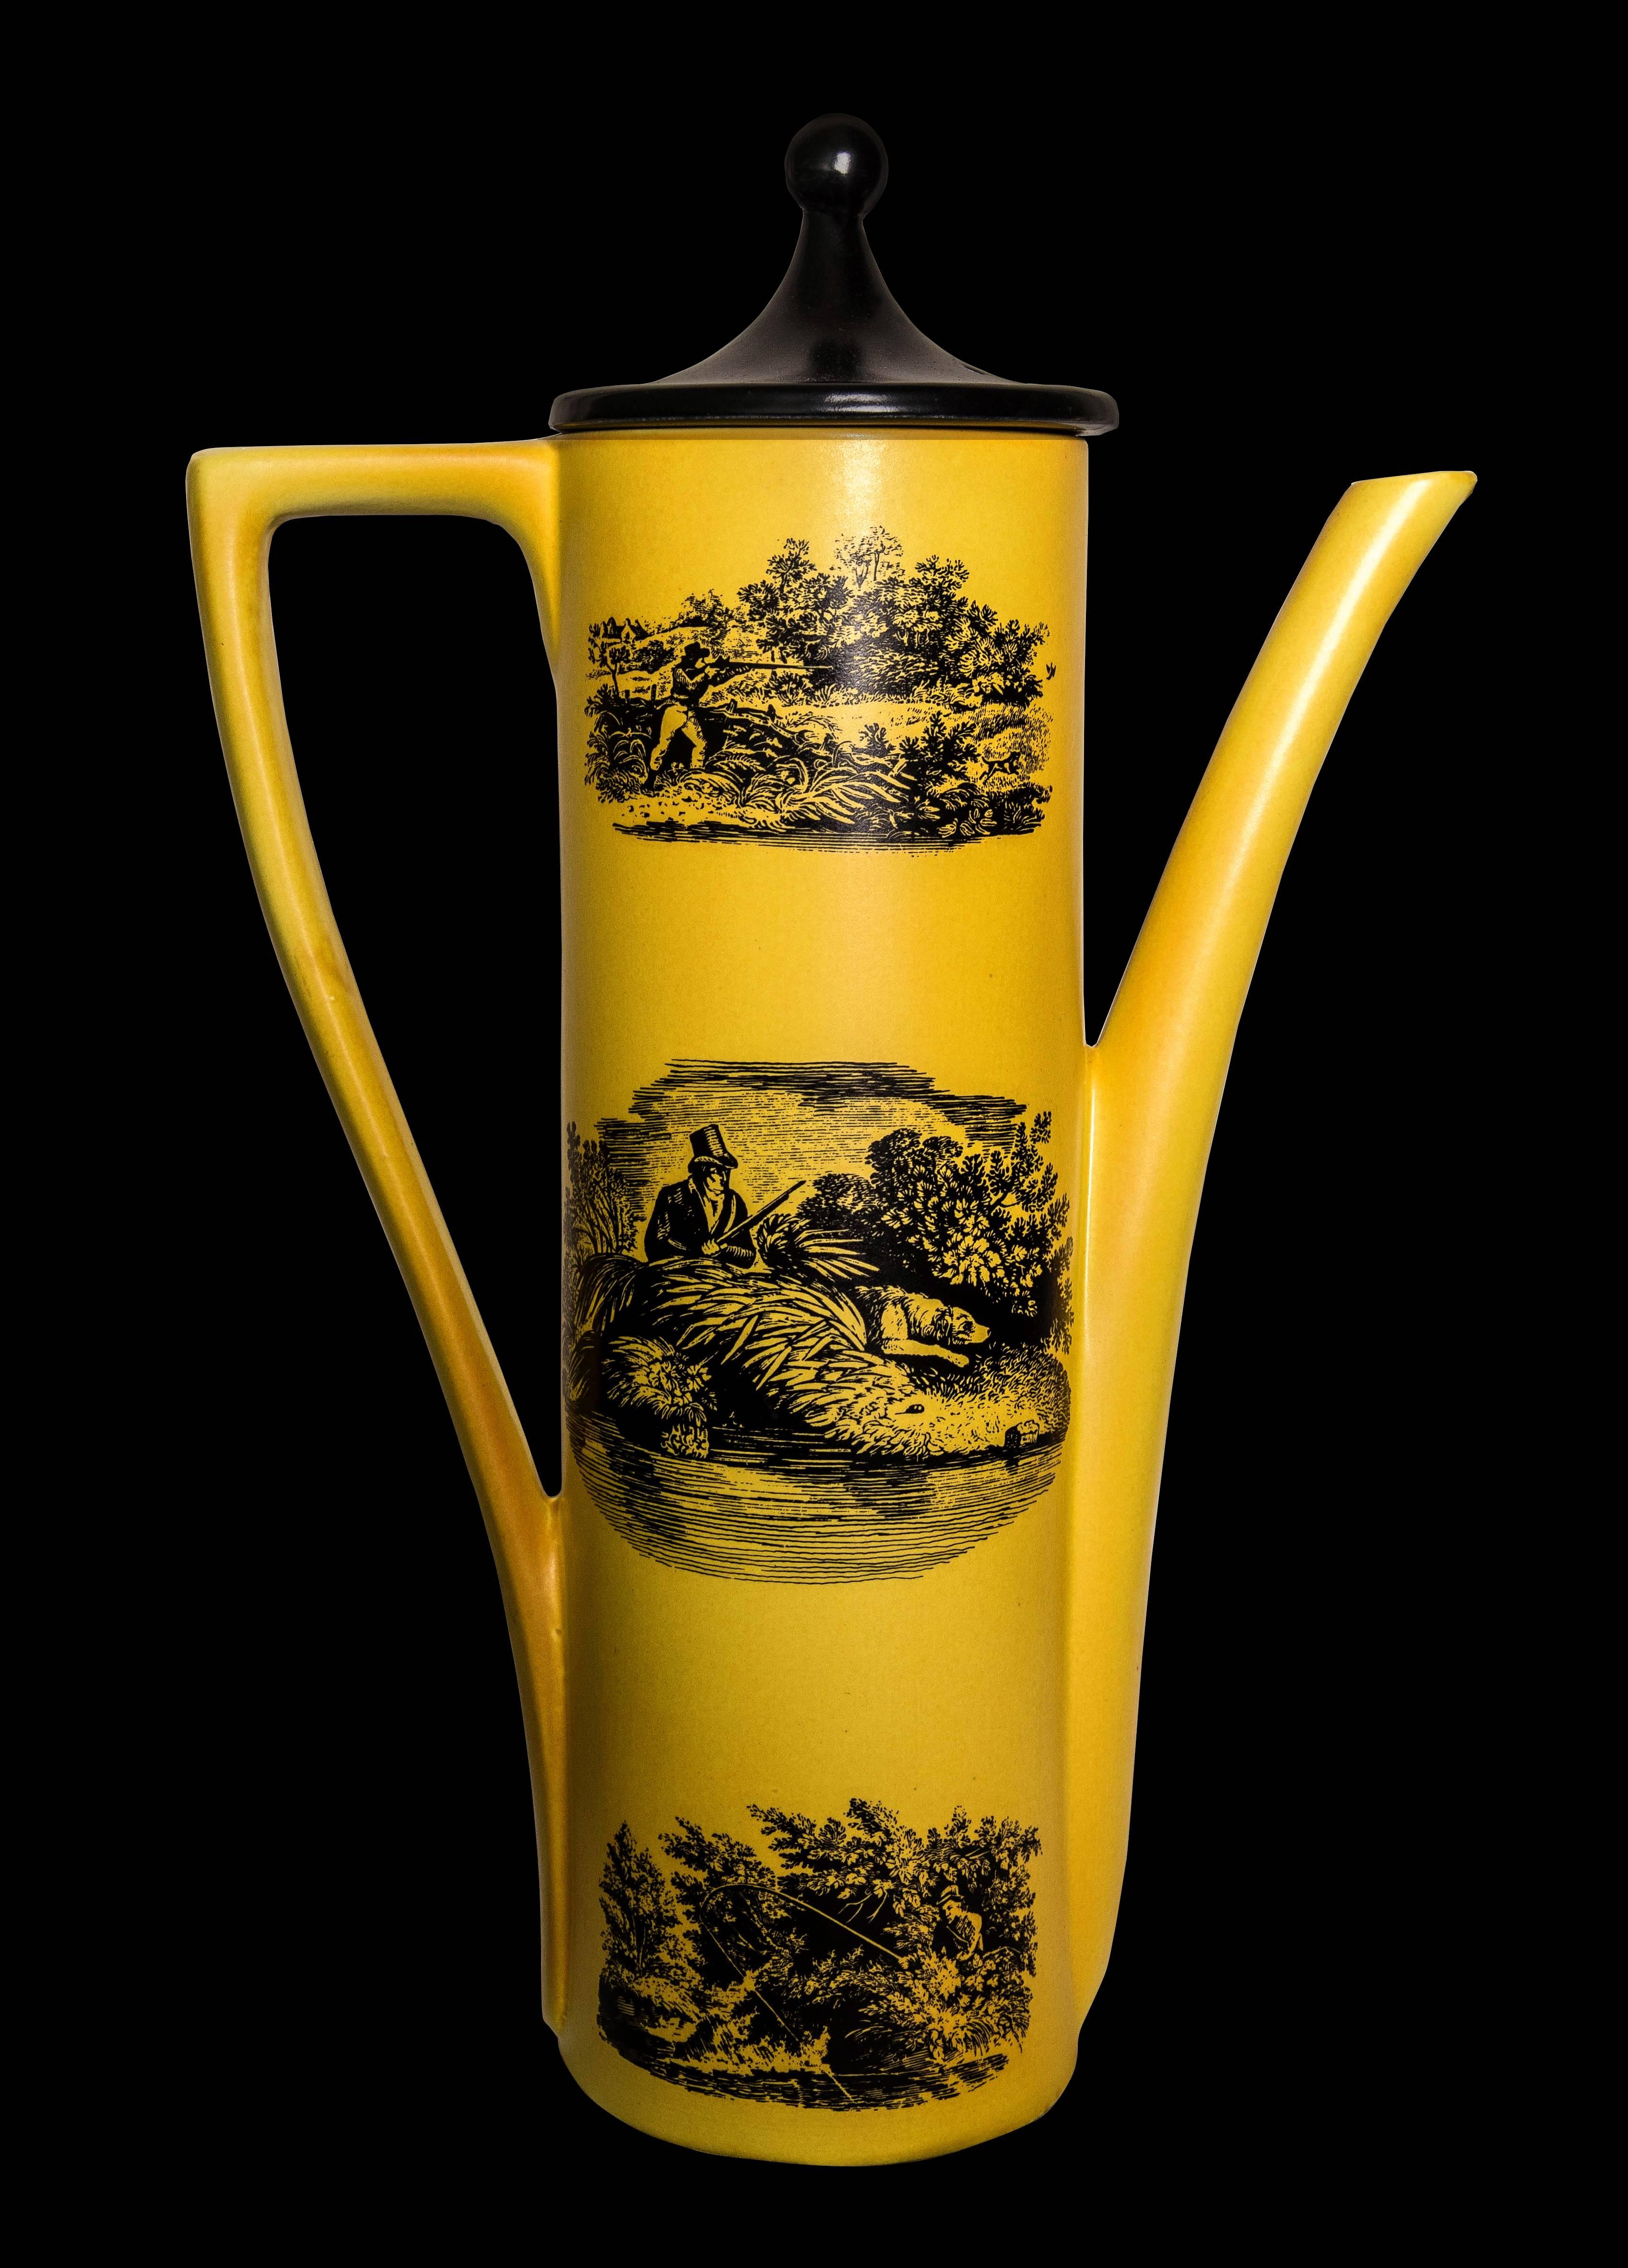 Elegant 1960s design coffee pot in rare graphic yellow and black glaze colourway, depicting 'Sporting Scenes' from engravings by Thomas Berwick 1752-1828. Designed by the renowned Susan Williams-Ellis, who made a major contribution to British design